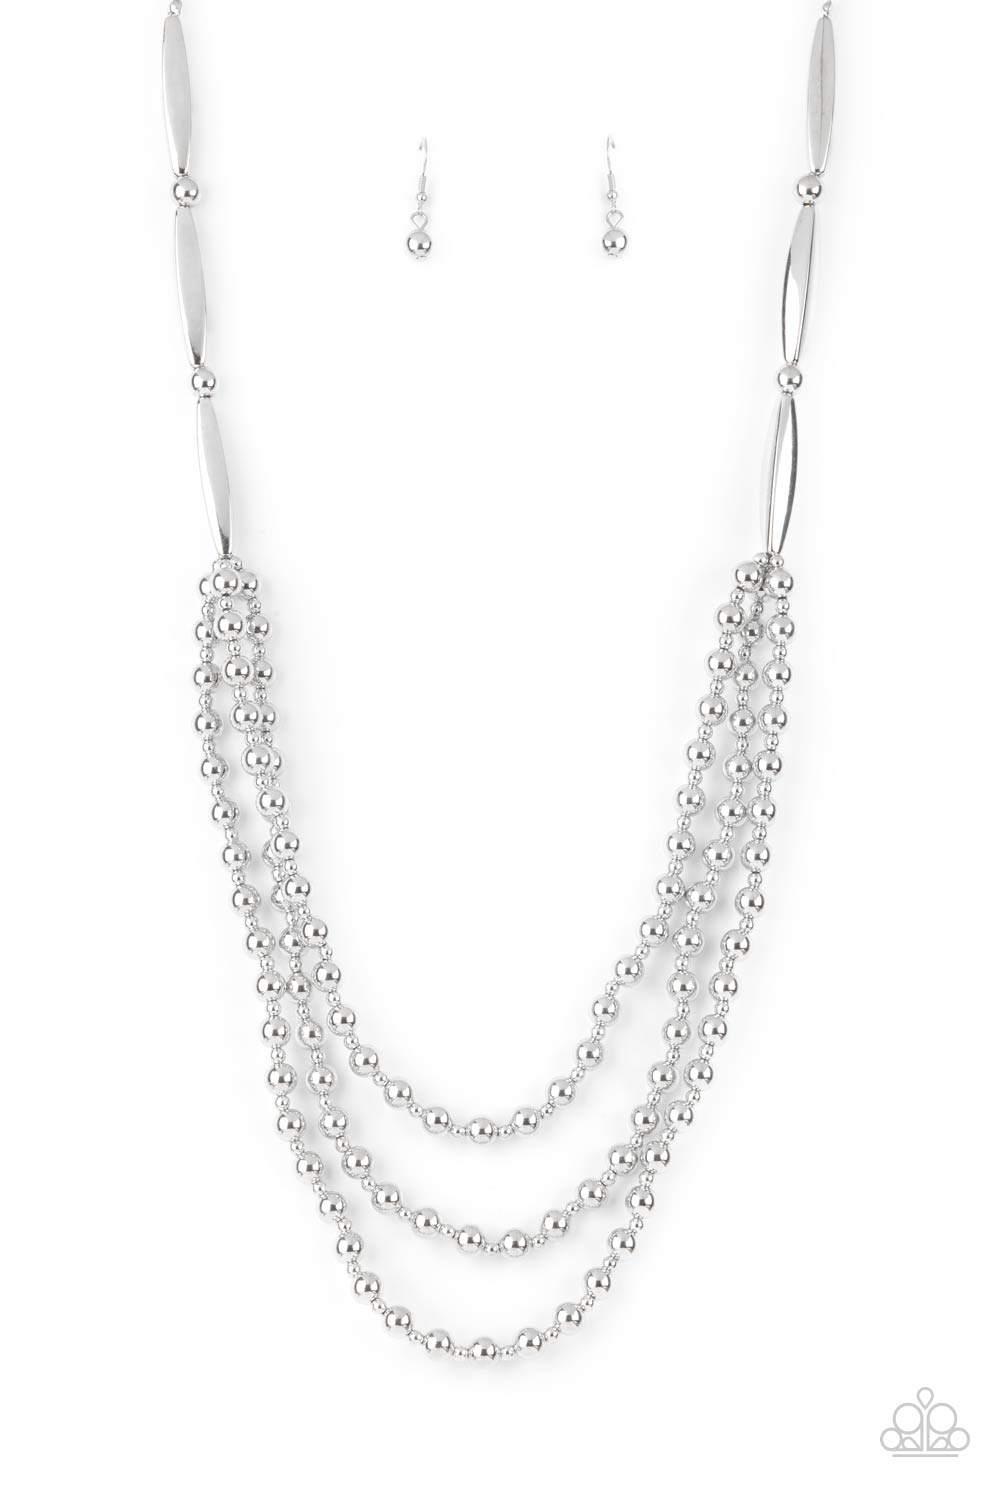 Paparazzi Beaded Beacon - Silver Necklace - A Finishing Touch Jewelry